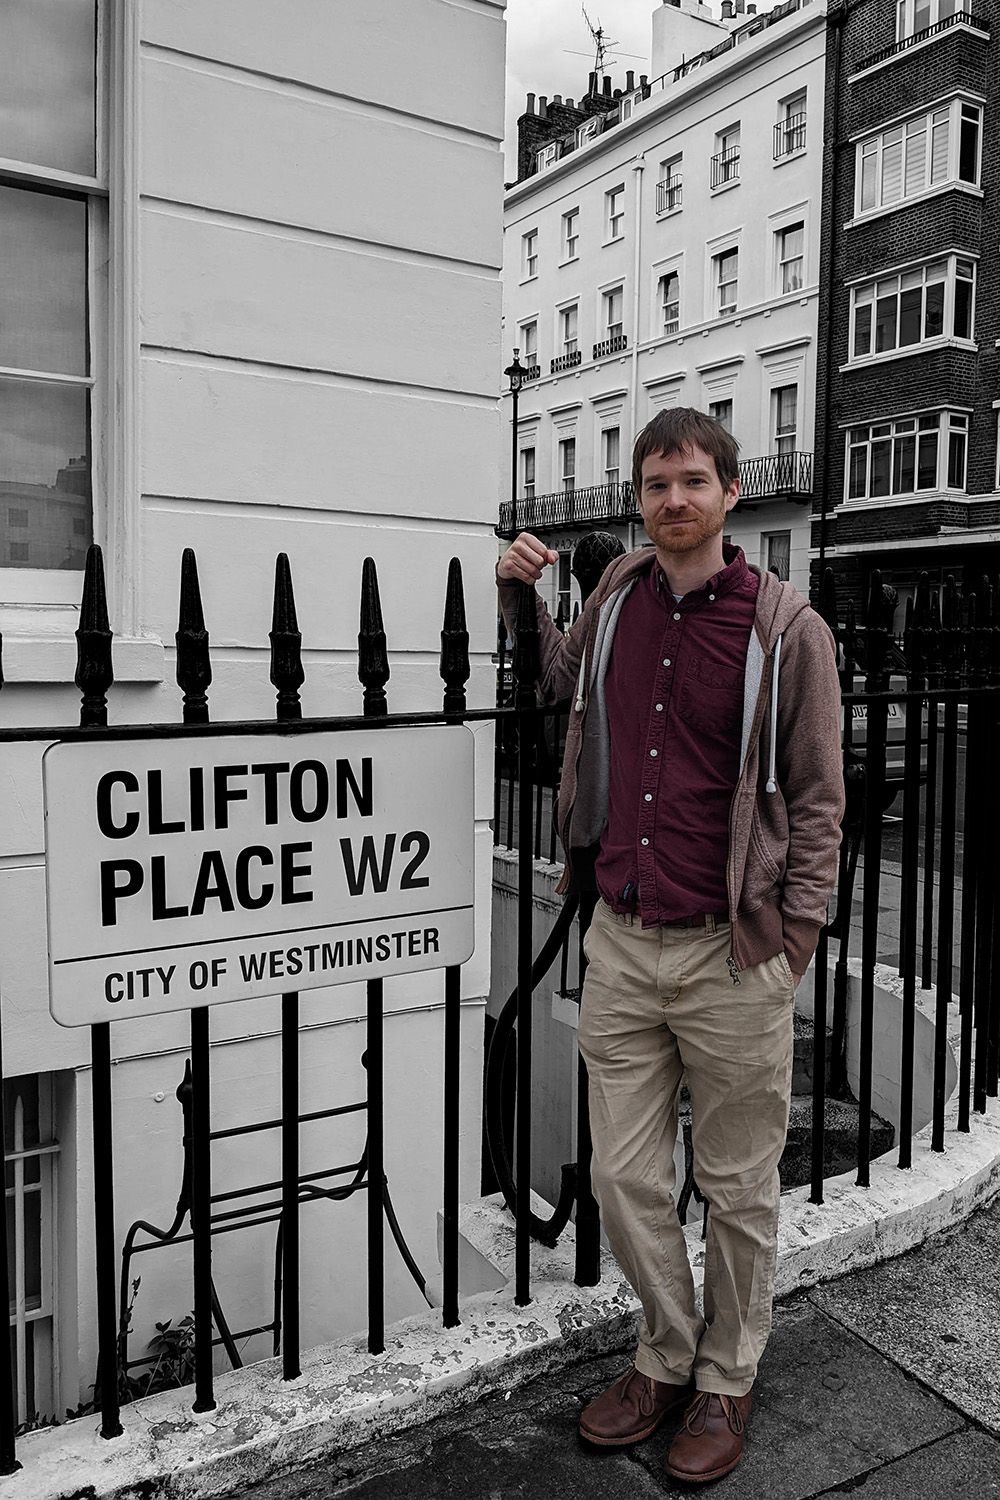 A man standing next to a sign that says Clifton Place